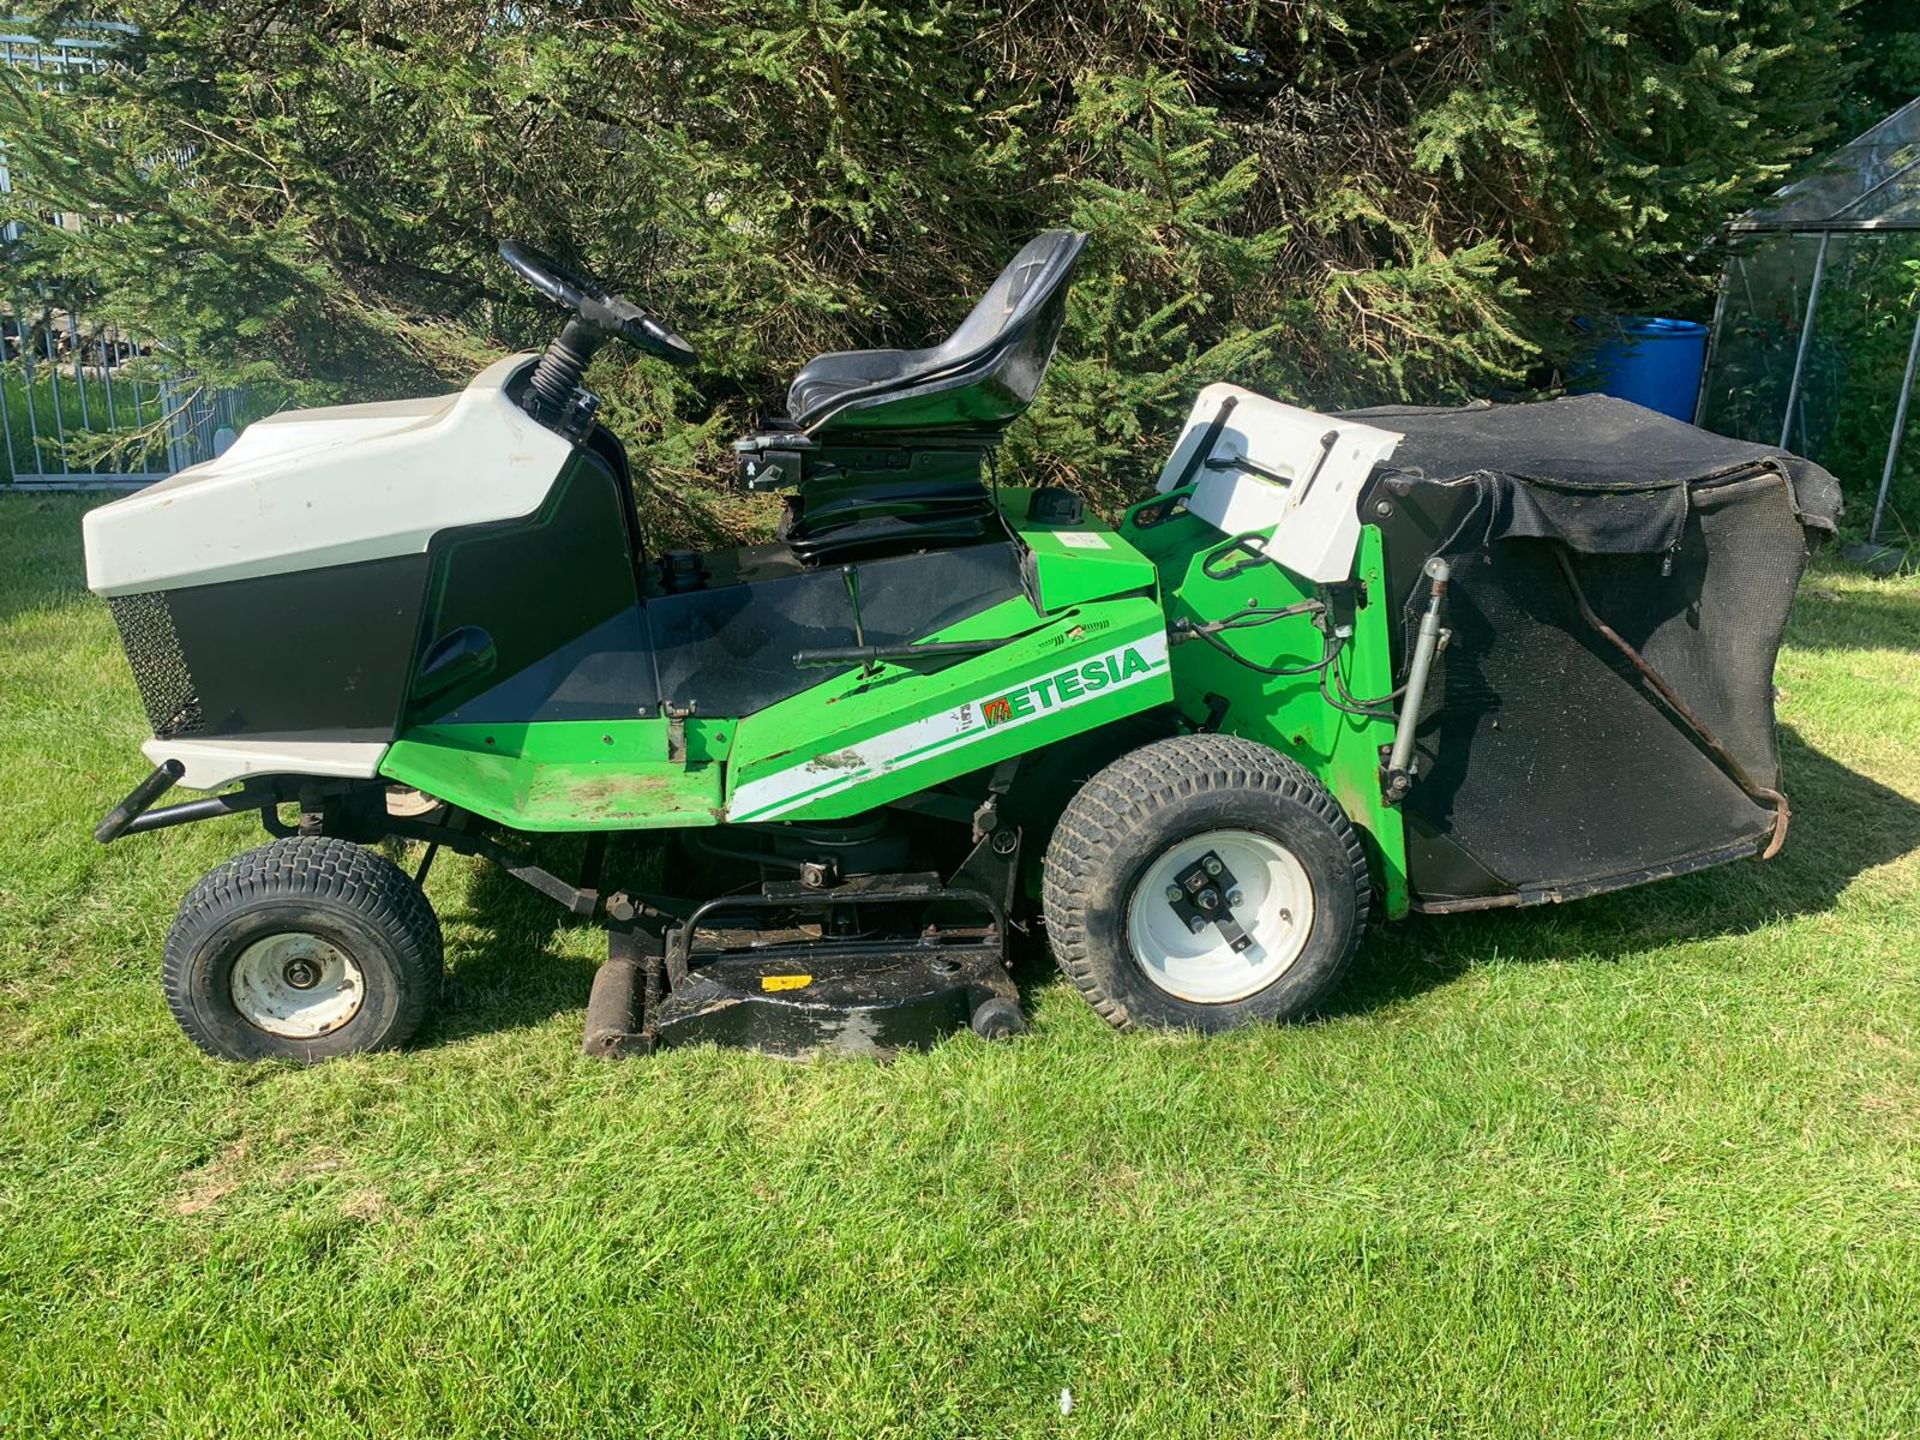 ETESIA MVEHH HYDRO RIDE ON LAWN MOWER C/W REAR GRASS COLLECTOR, RUNS, WORKS AND CUTS *PLUS VAT* - Image 6 of 16